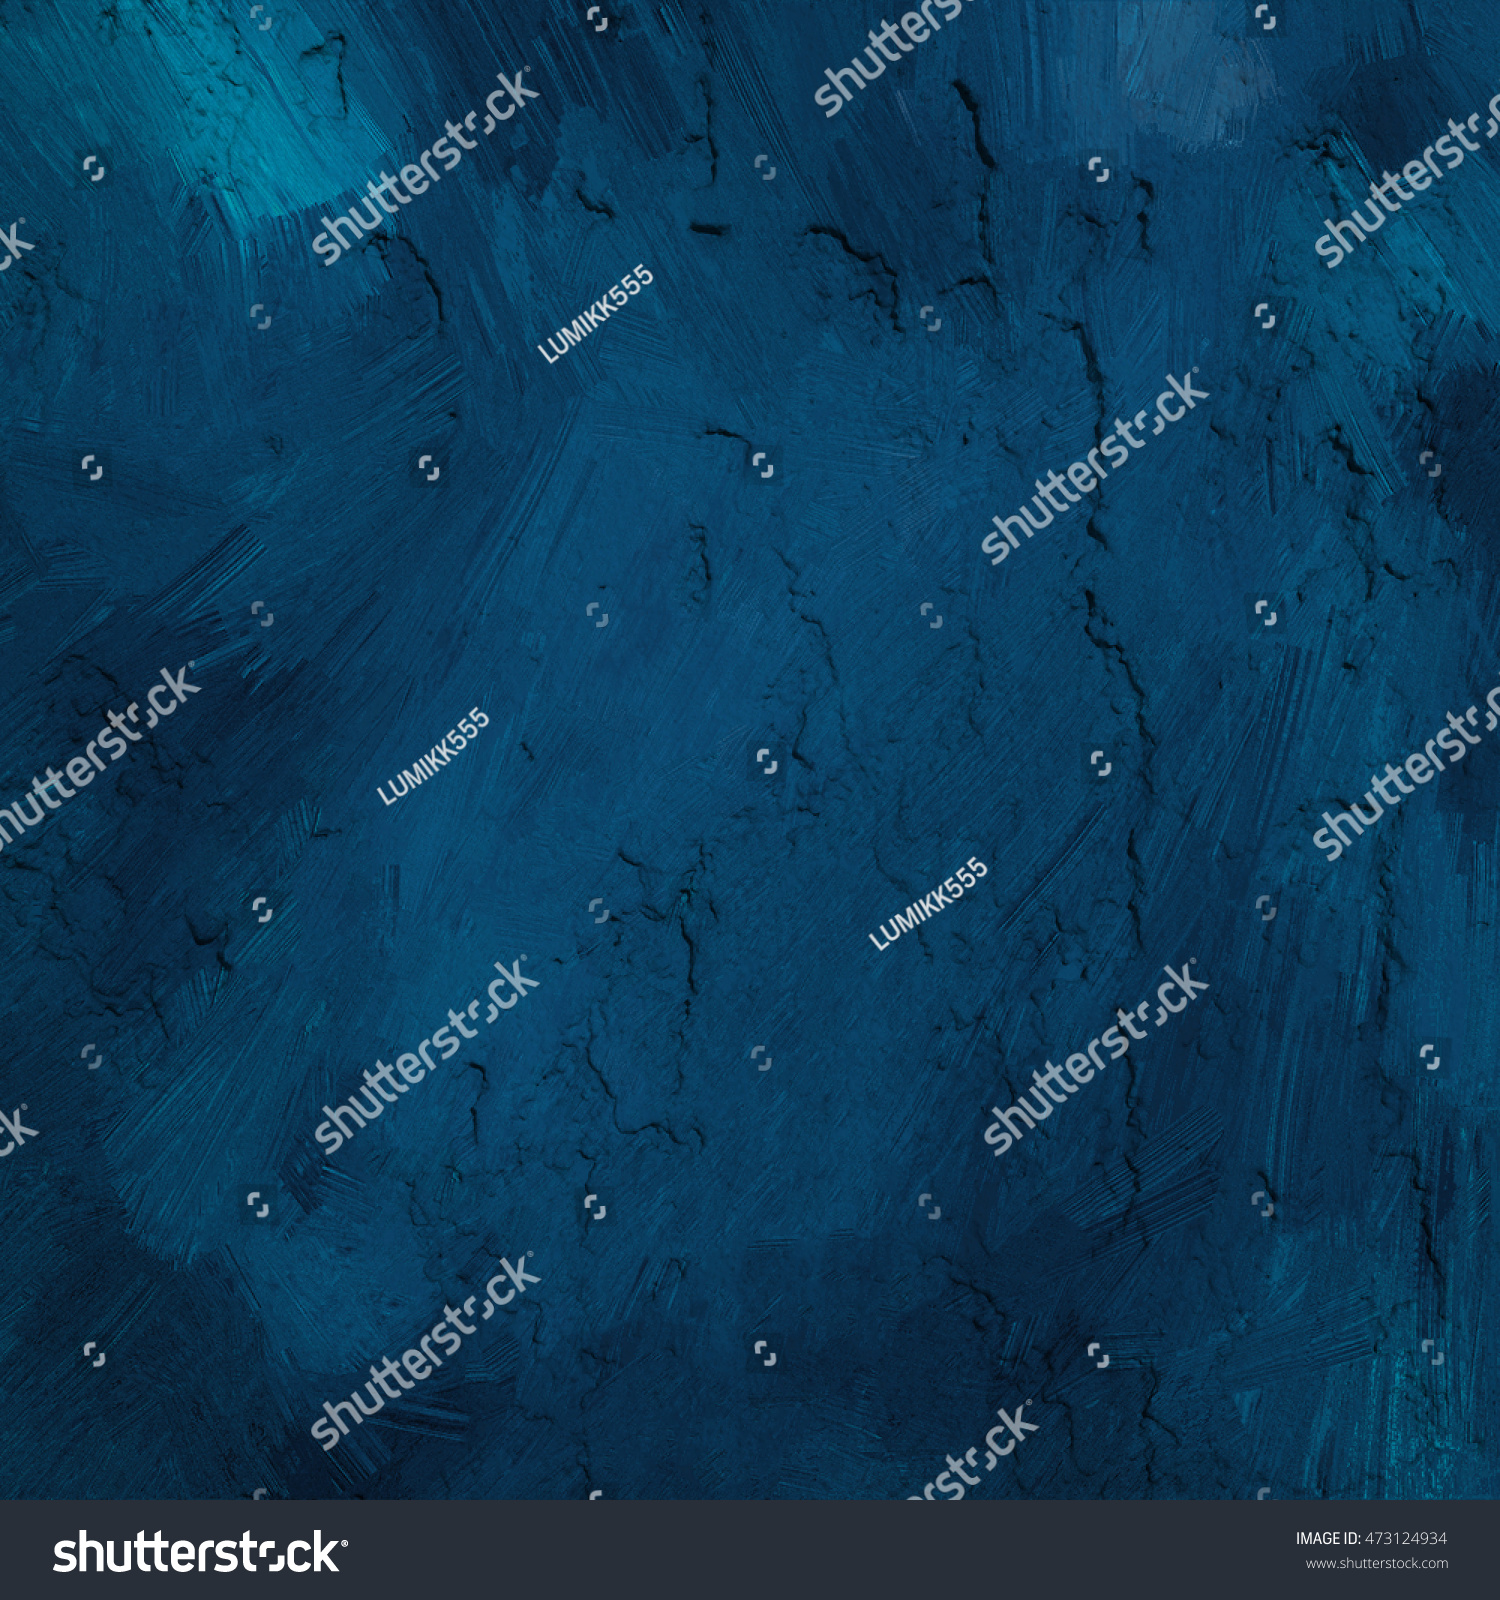 Abstract grunge navy blue background, art painted texture #473124934